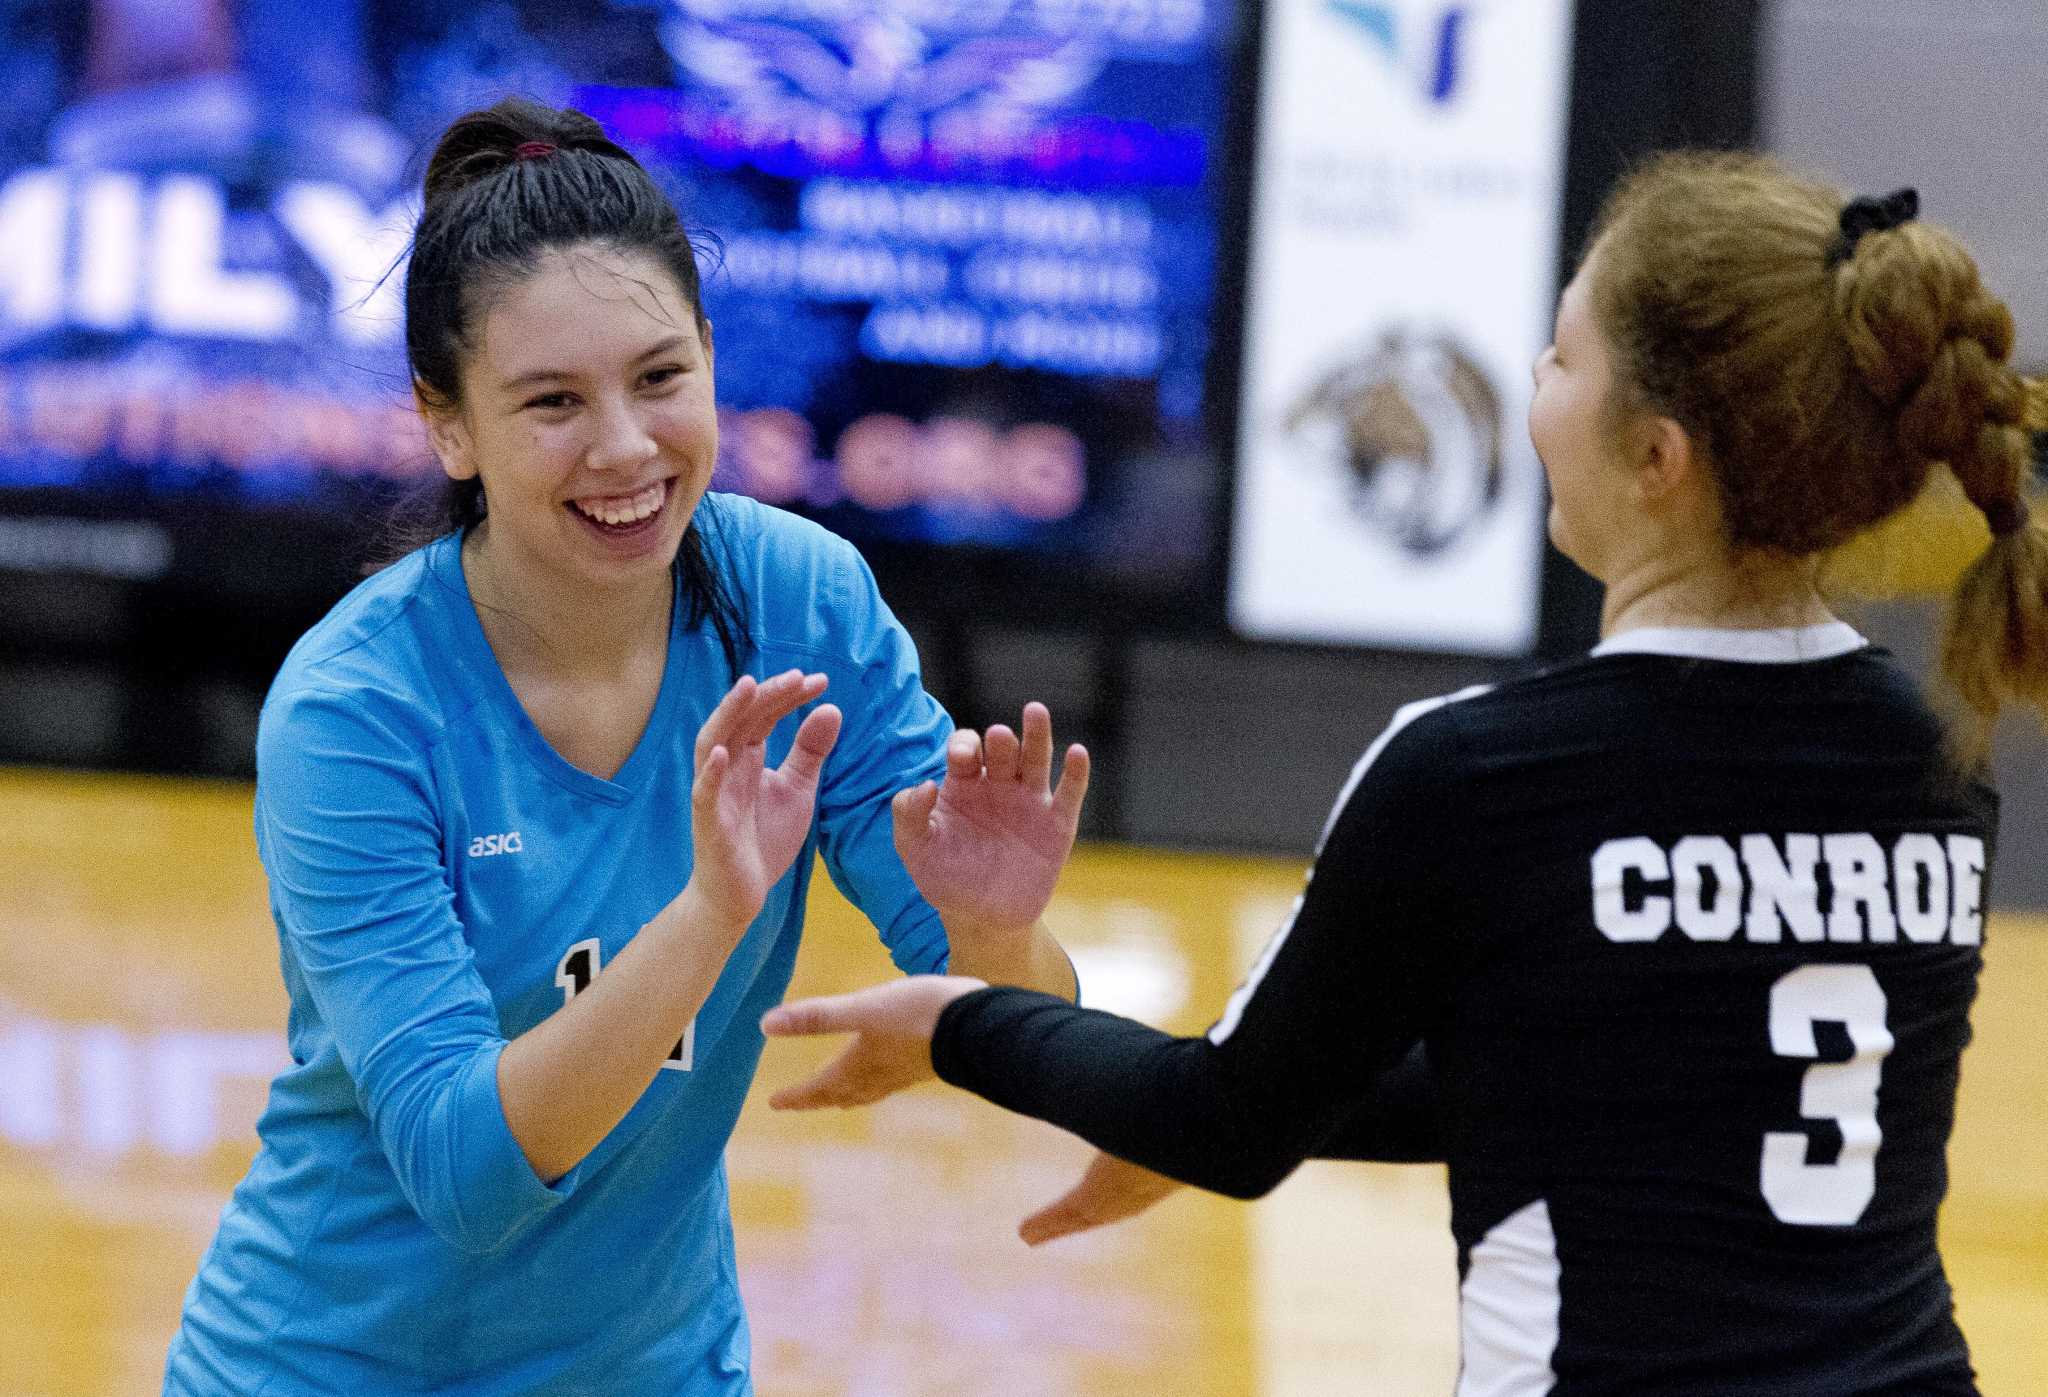 VOLLEYBALL: Led by Anzueto, Conroe ready to compete this season